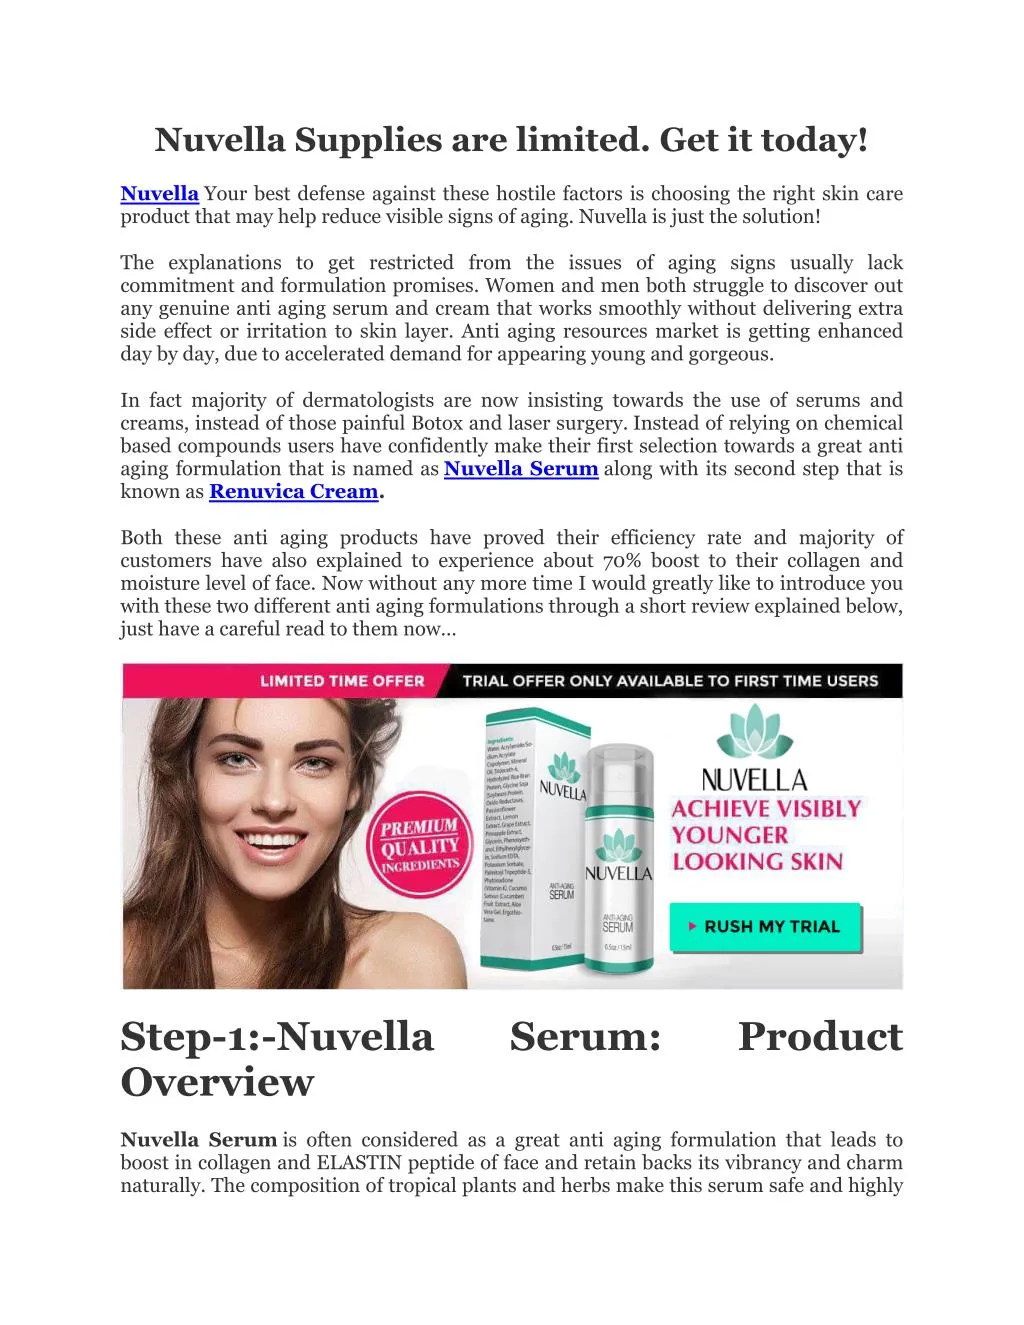 nuvella supplies are limited get it today